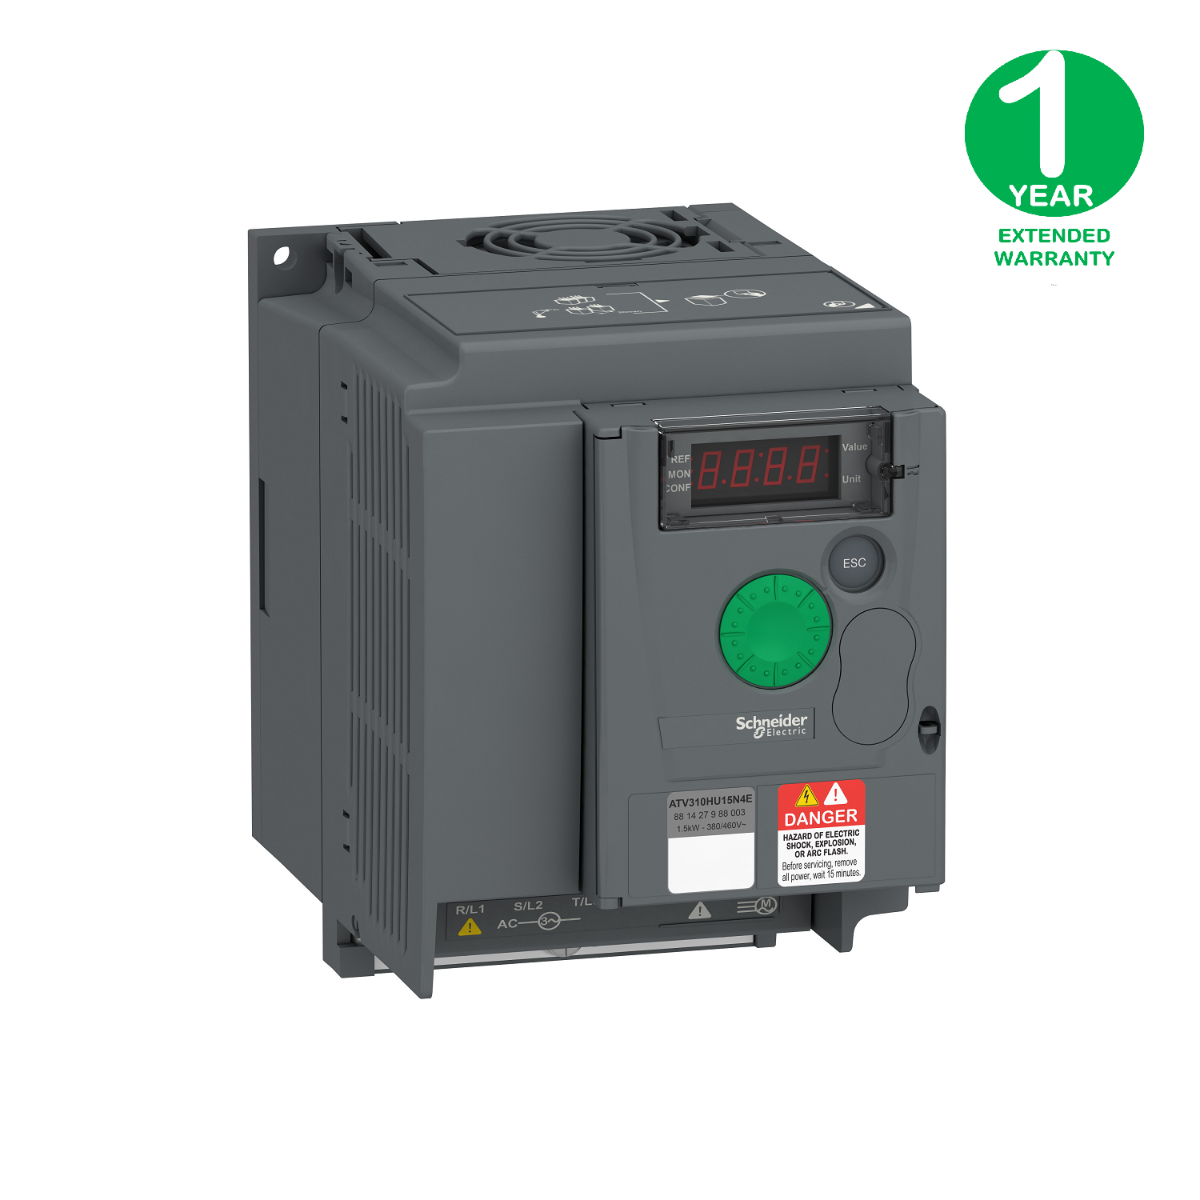 variable speed drive ATV310, 1.5 kW, 2 hp, 380...460 V, 3 phase, without filter + Extended Warranty 1 year